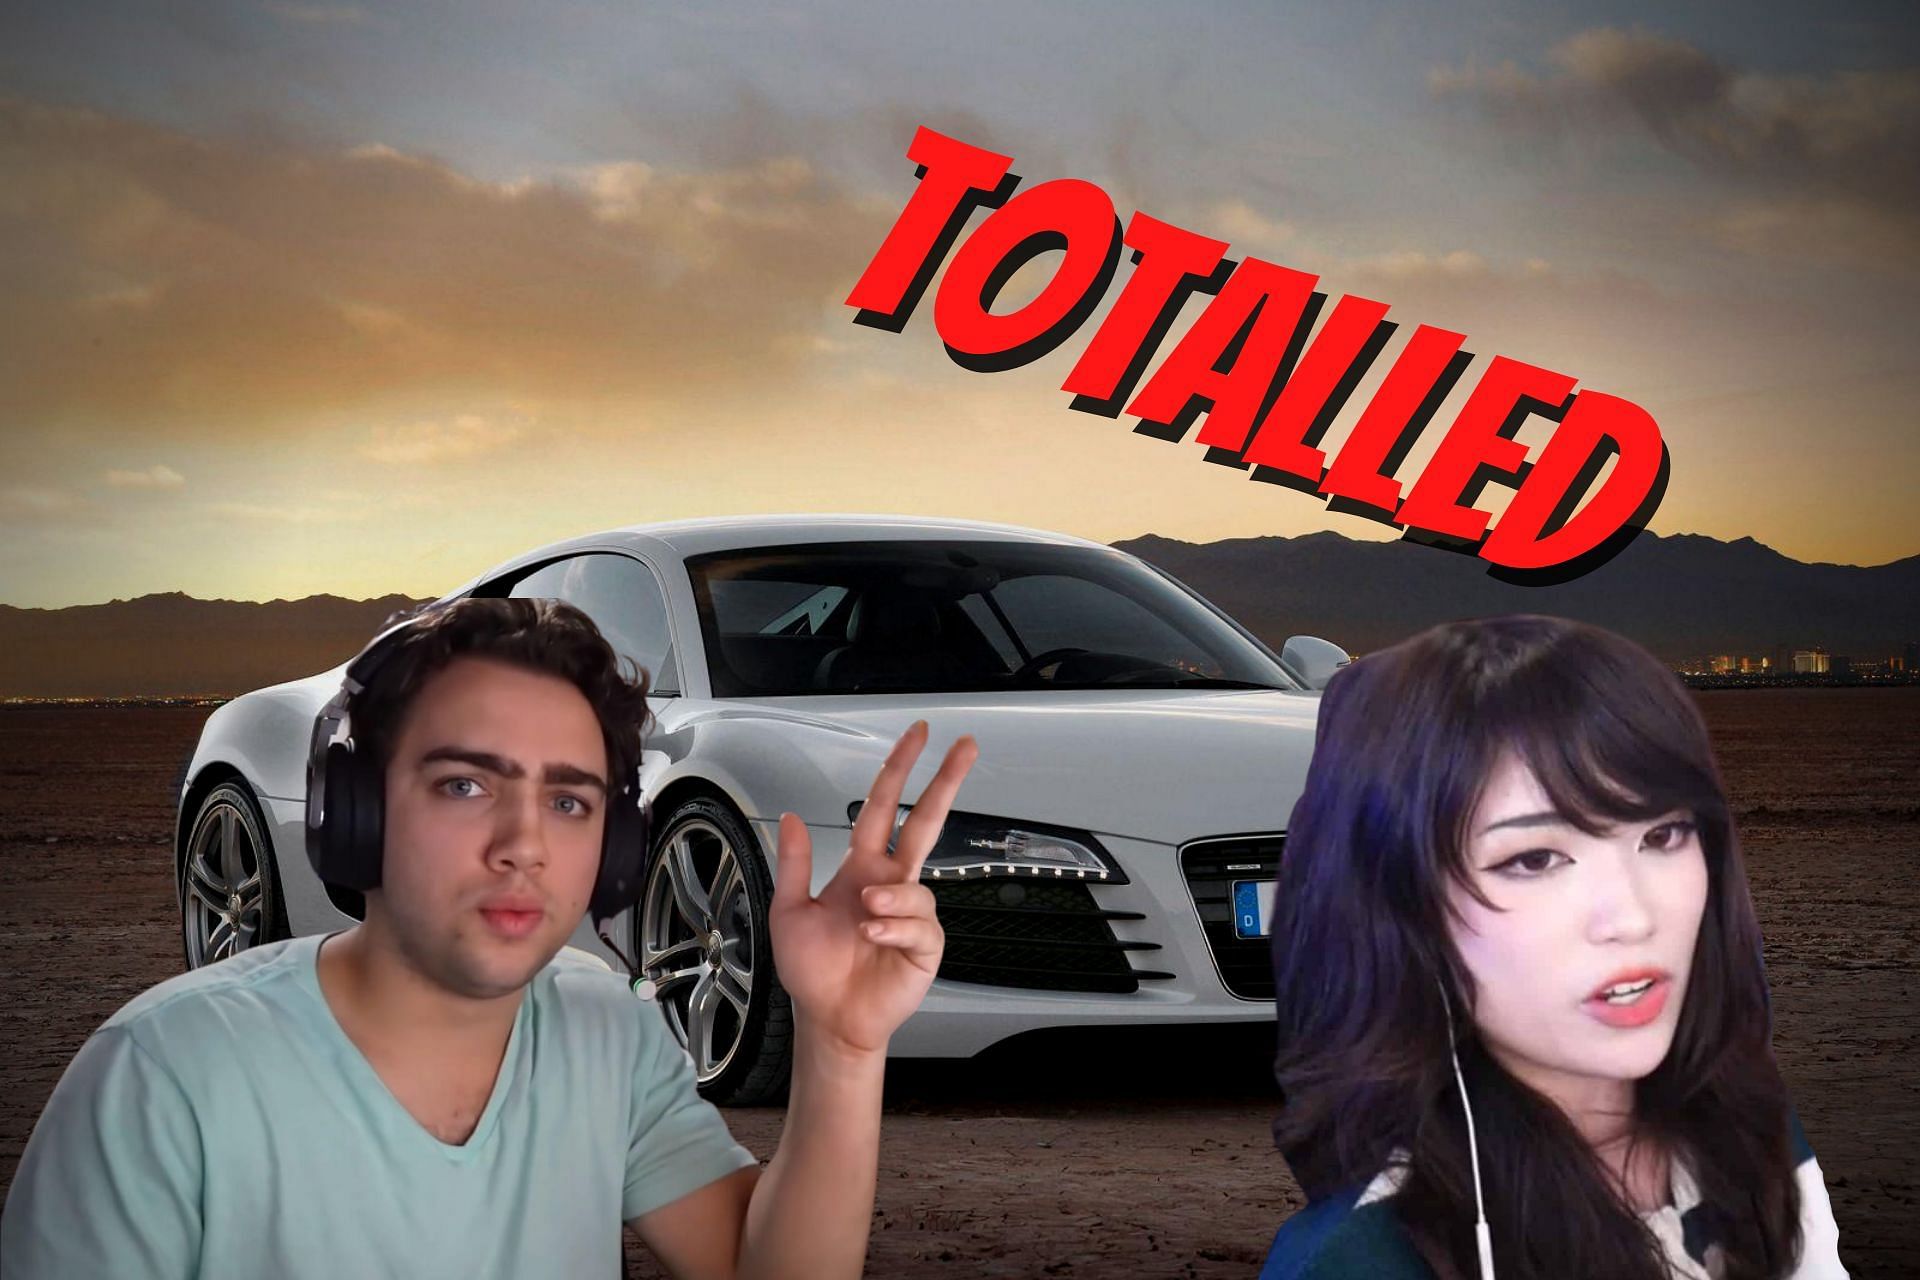 IRL Twitch streamer shocked as high-speed car crash happens right